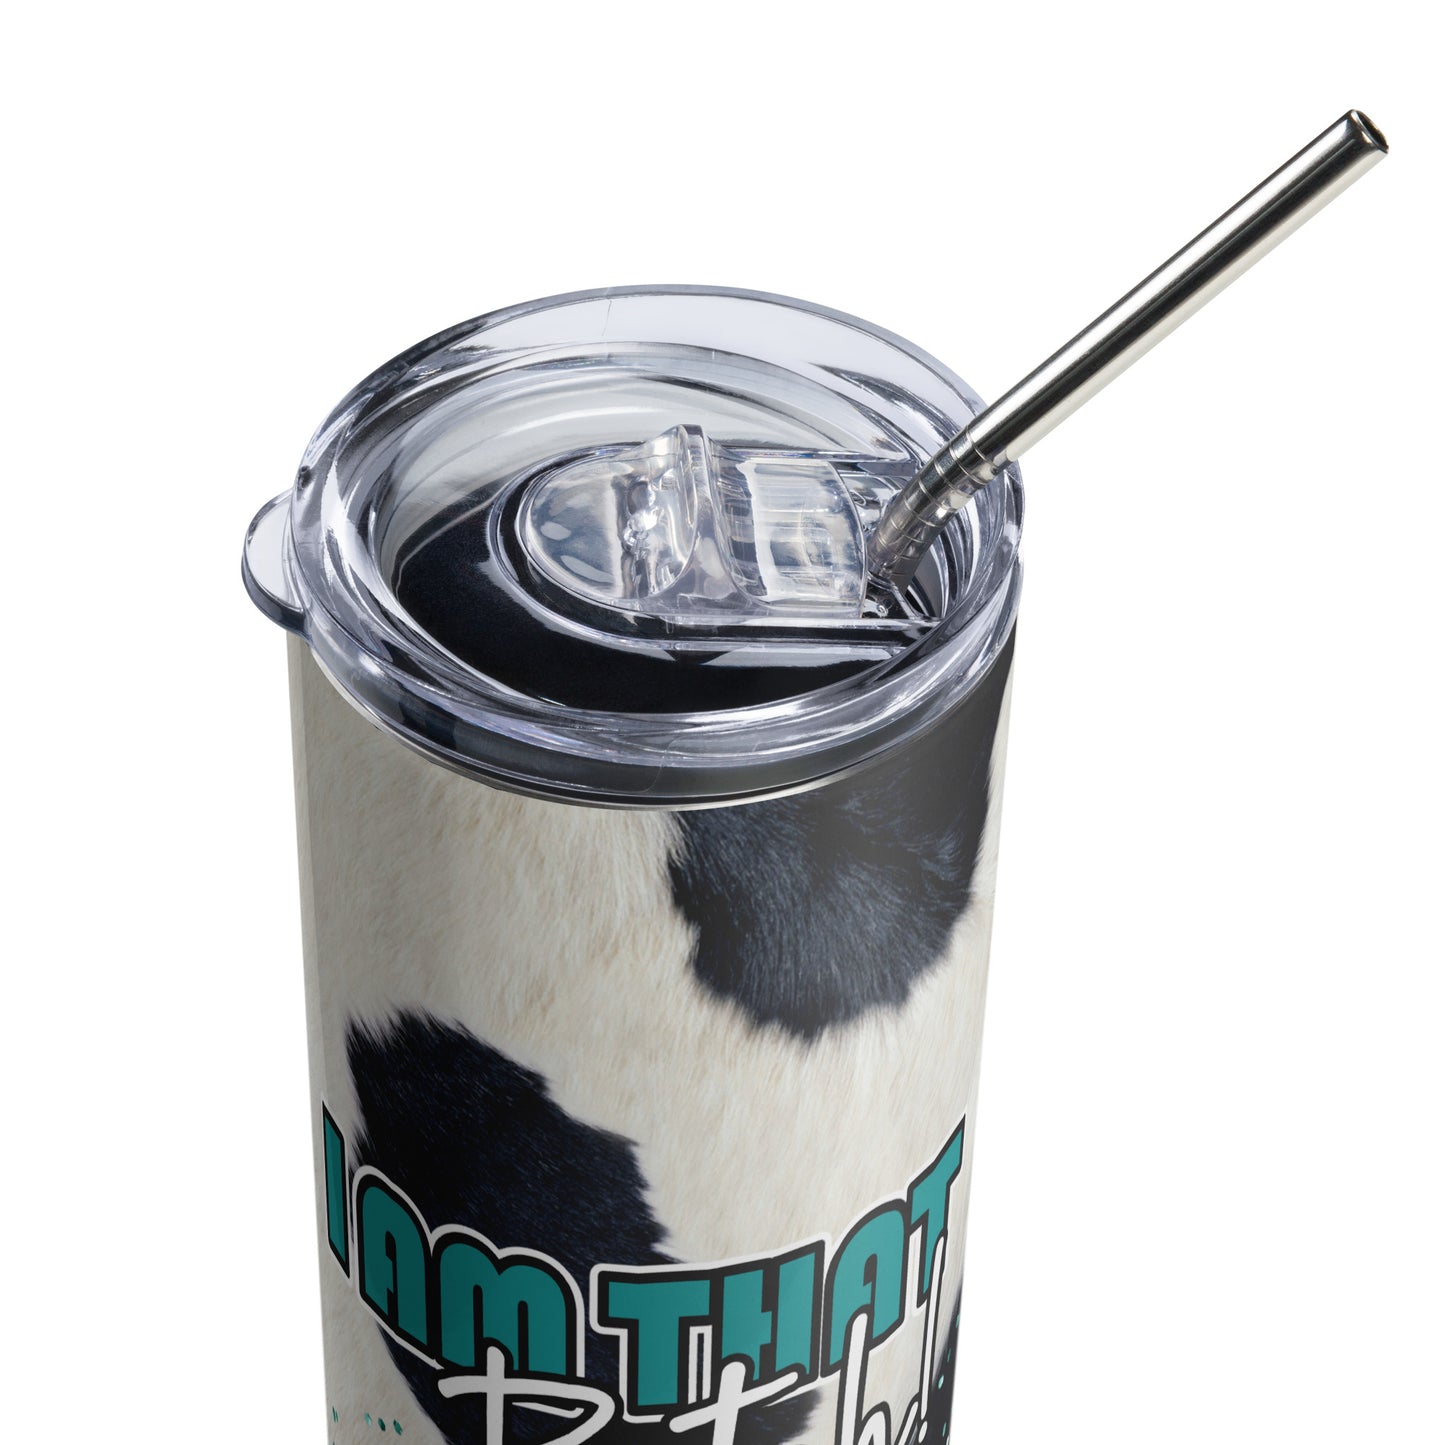 Stainless Steel Tumbler - Cow Print - I AM THAT BITCH